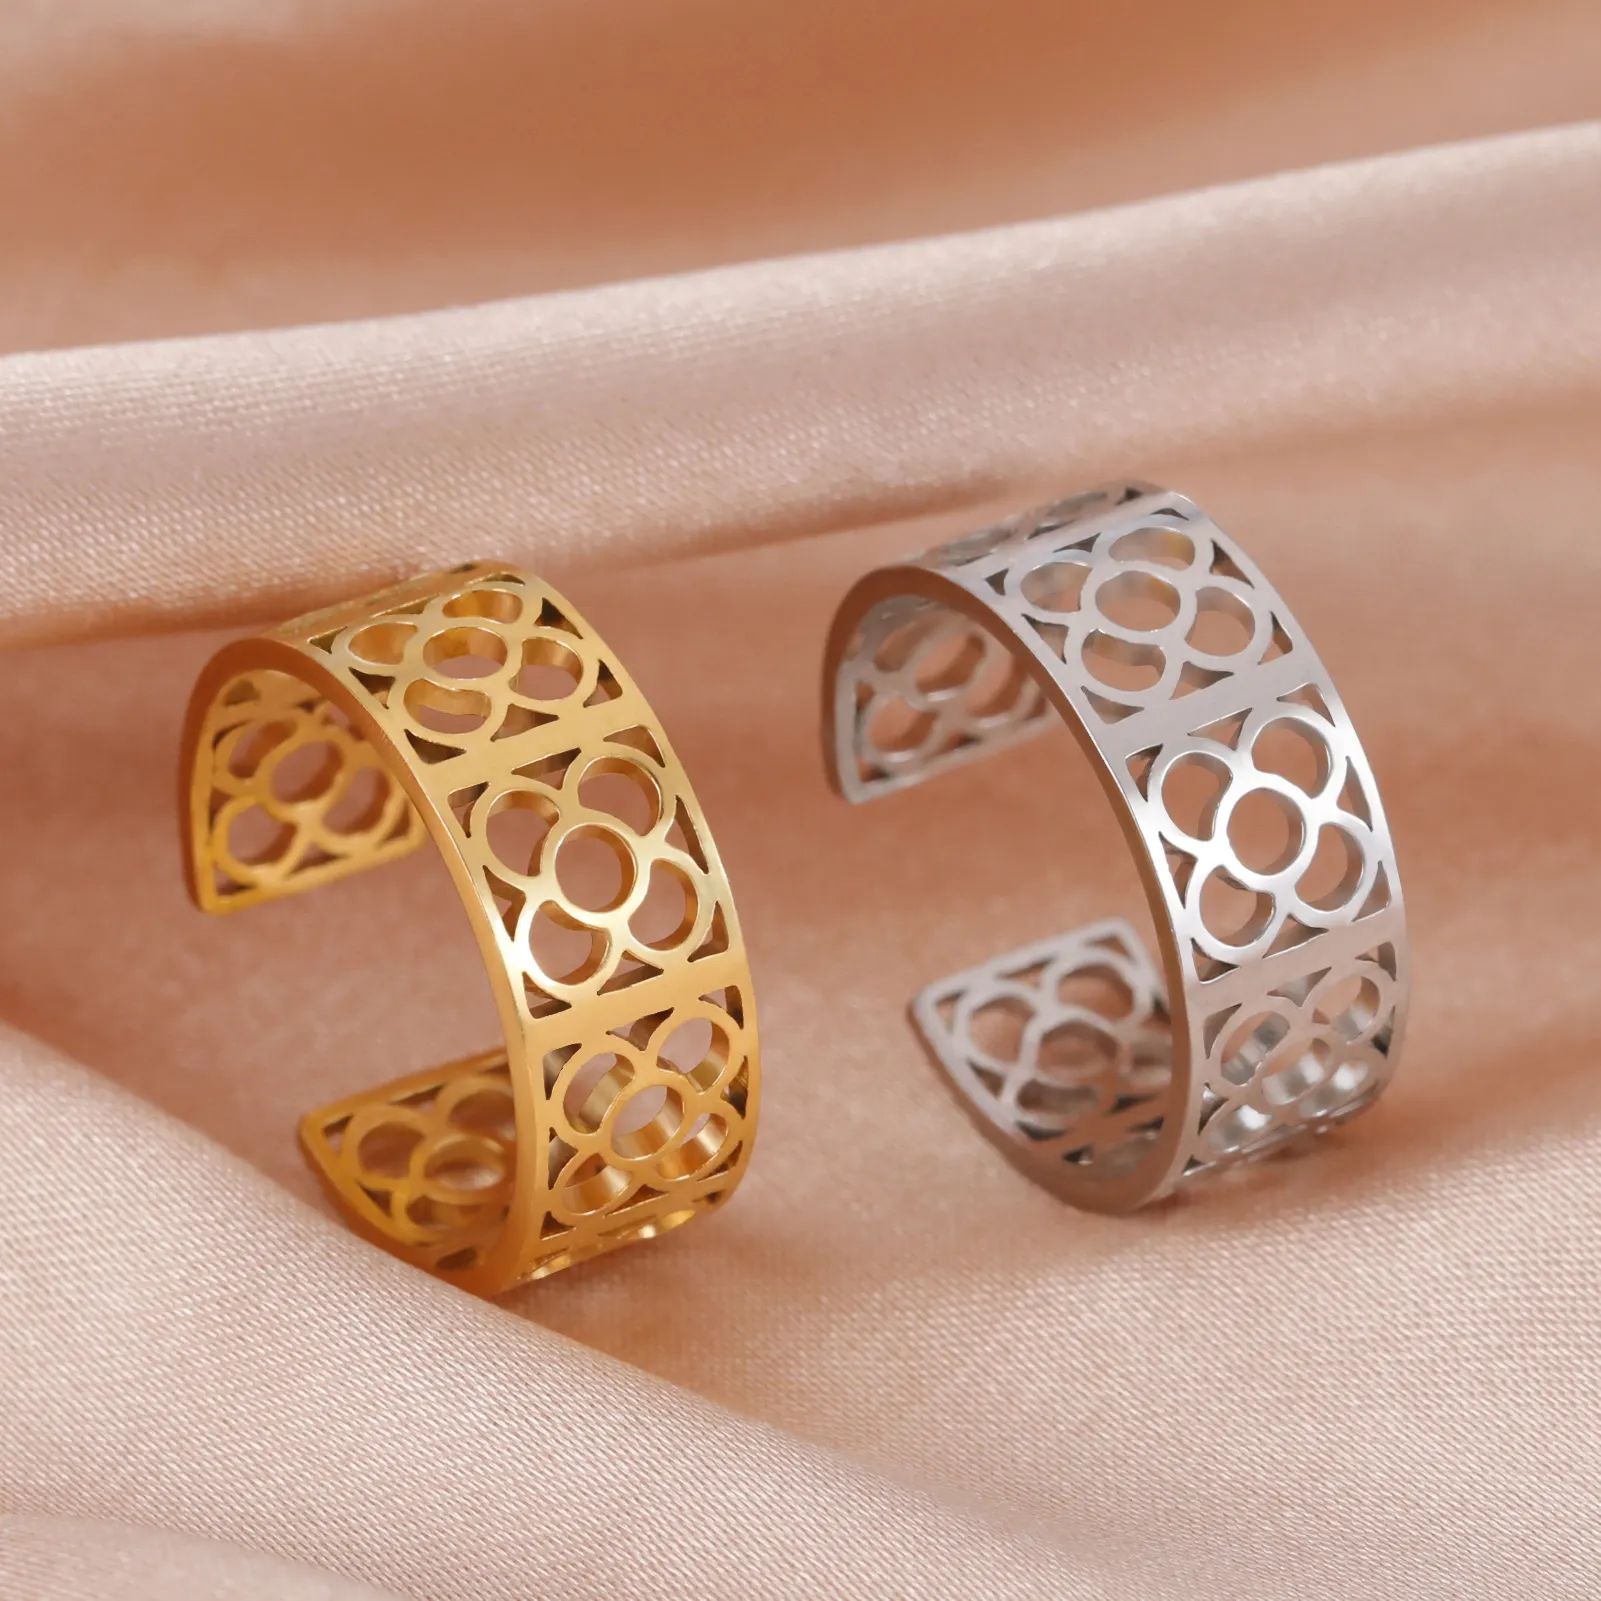 Barcelona Flower Square Ring Women Adjustable Stainless Steel Gold Color Aesthetic Rings Fashion Wedding Jewelry Gift Wholesale